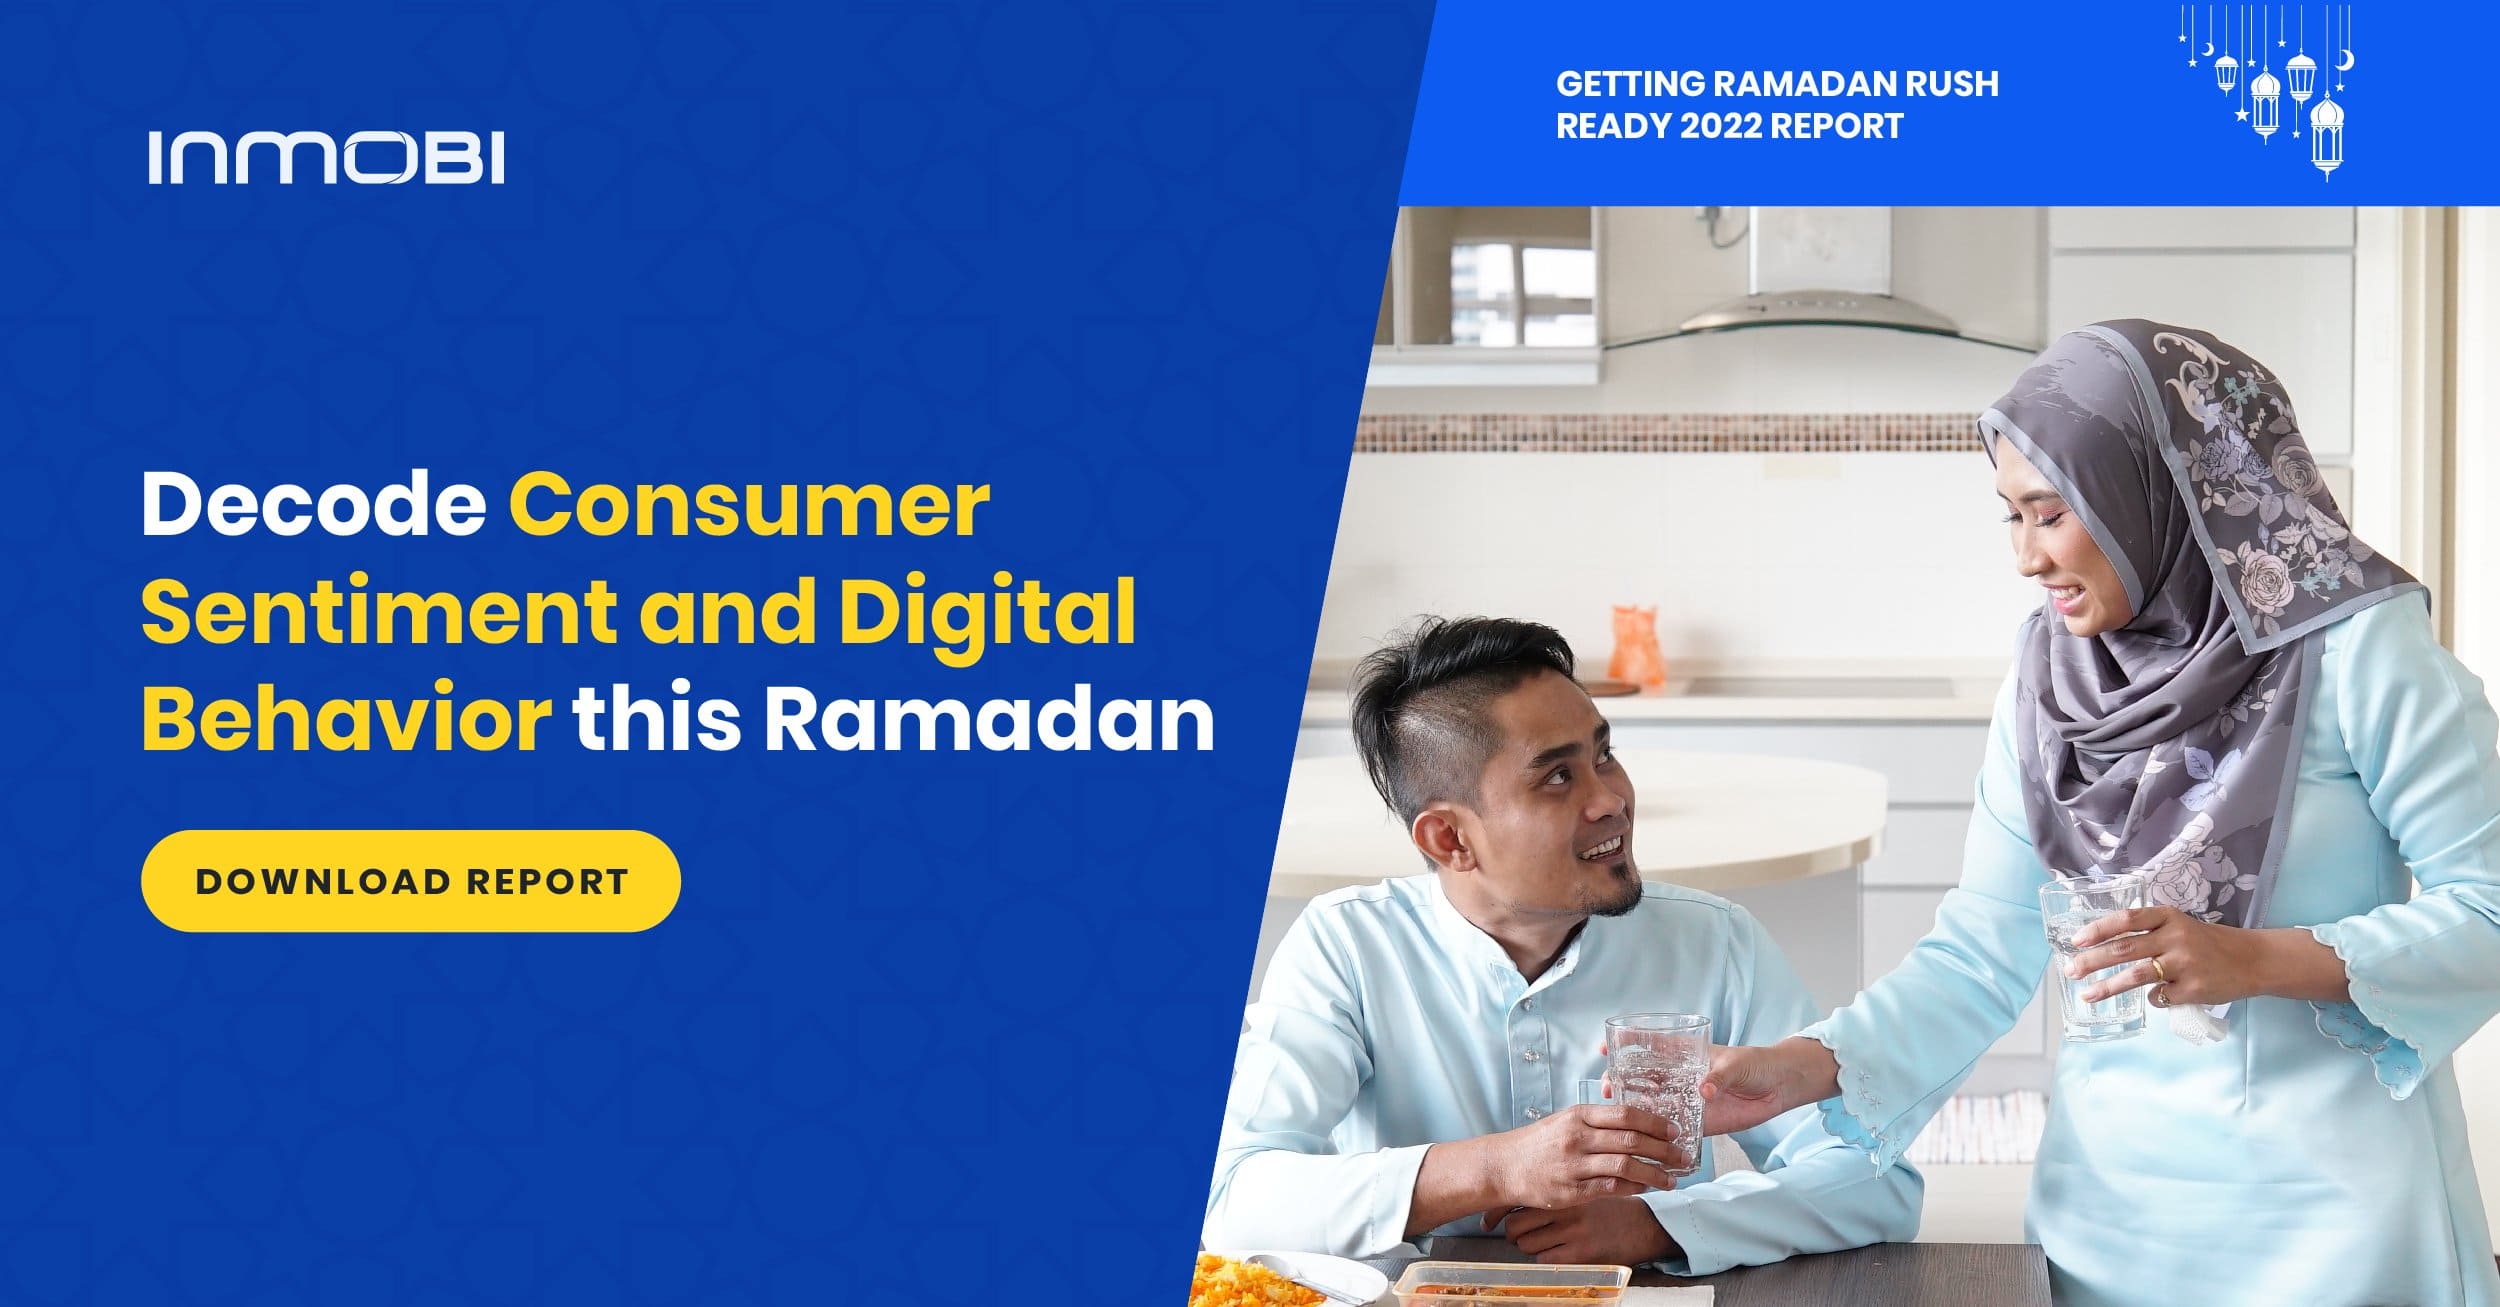 Building Resilient Brands: Getting Ramadan Rush Ready in 2022